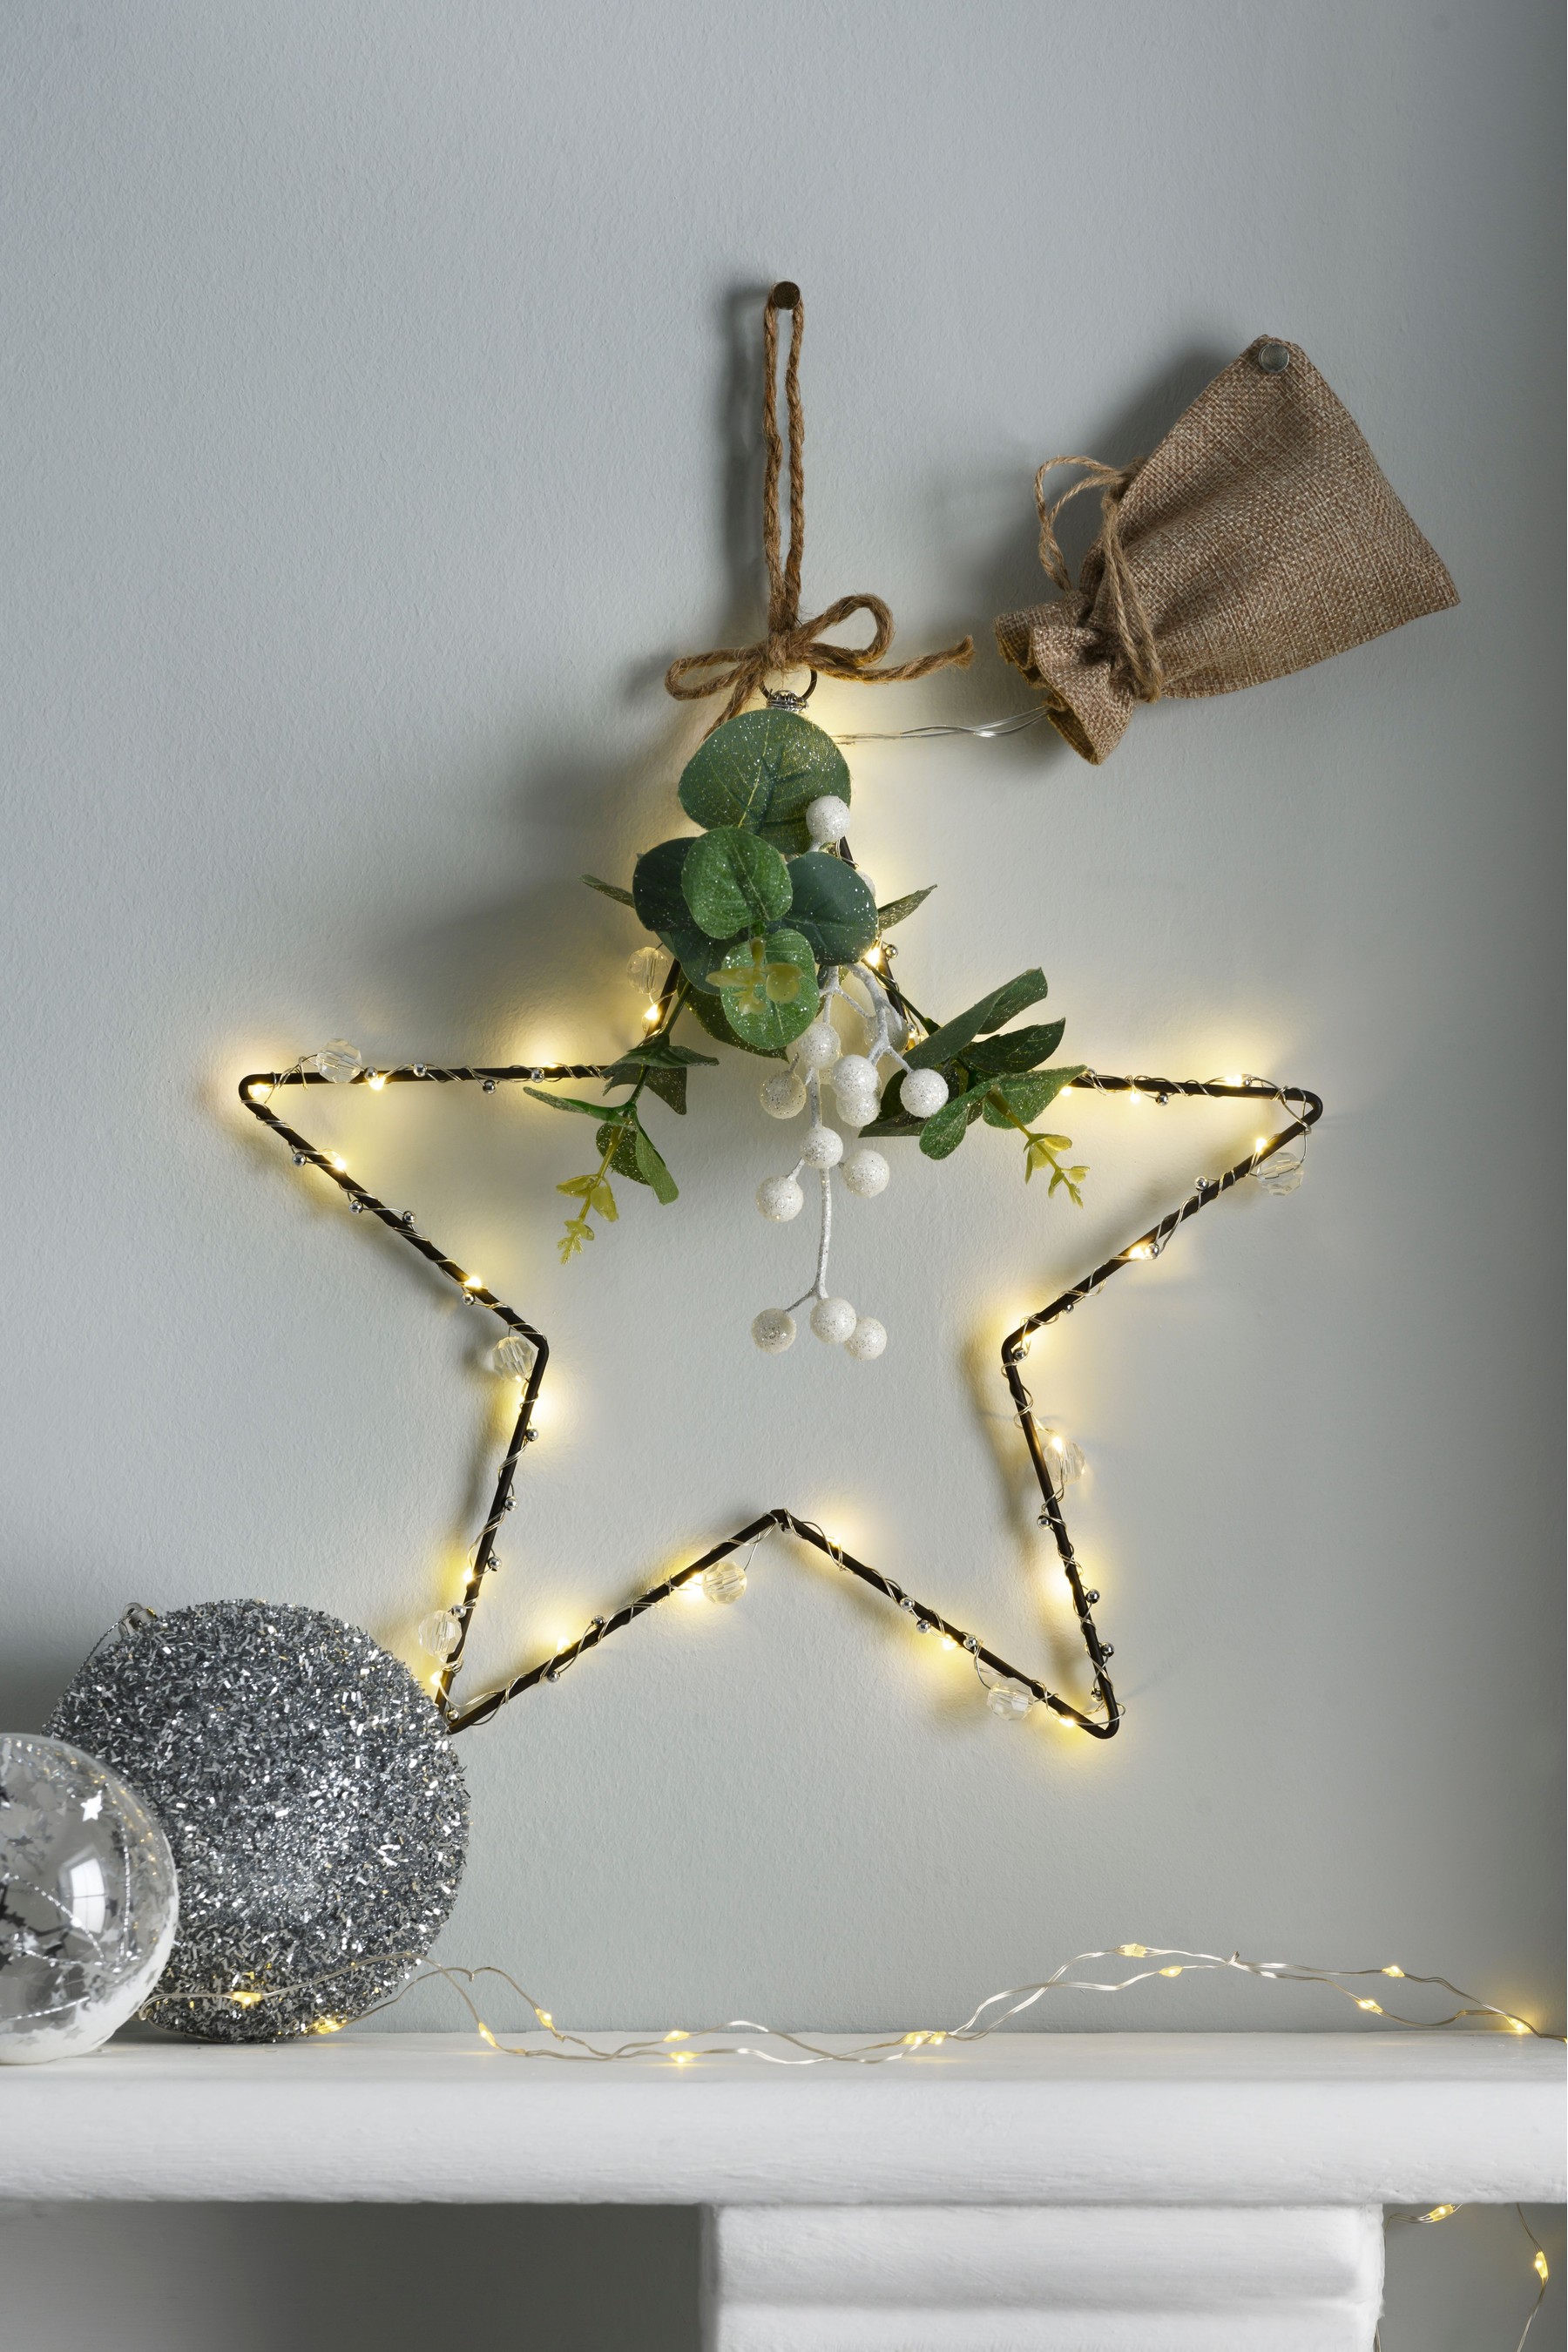 8 Next Christmas decorations that you NEED in your home this winter